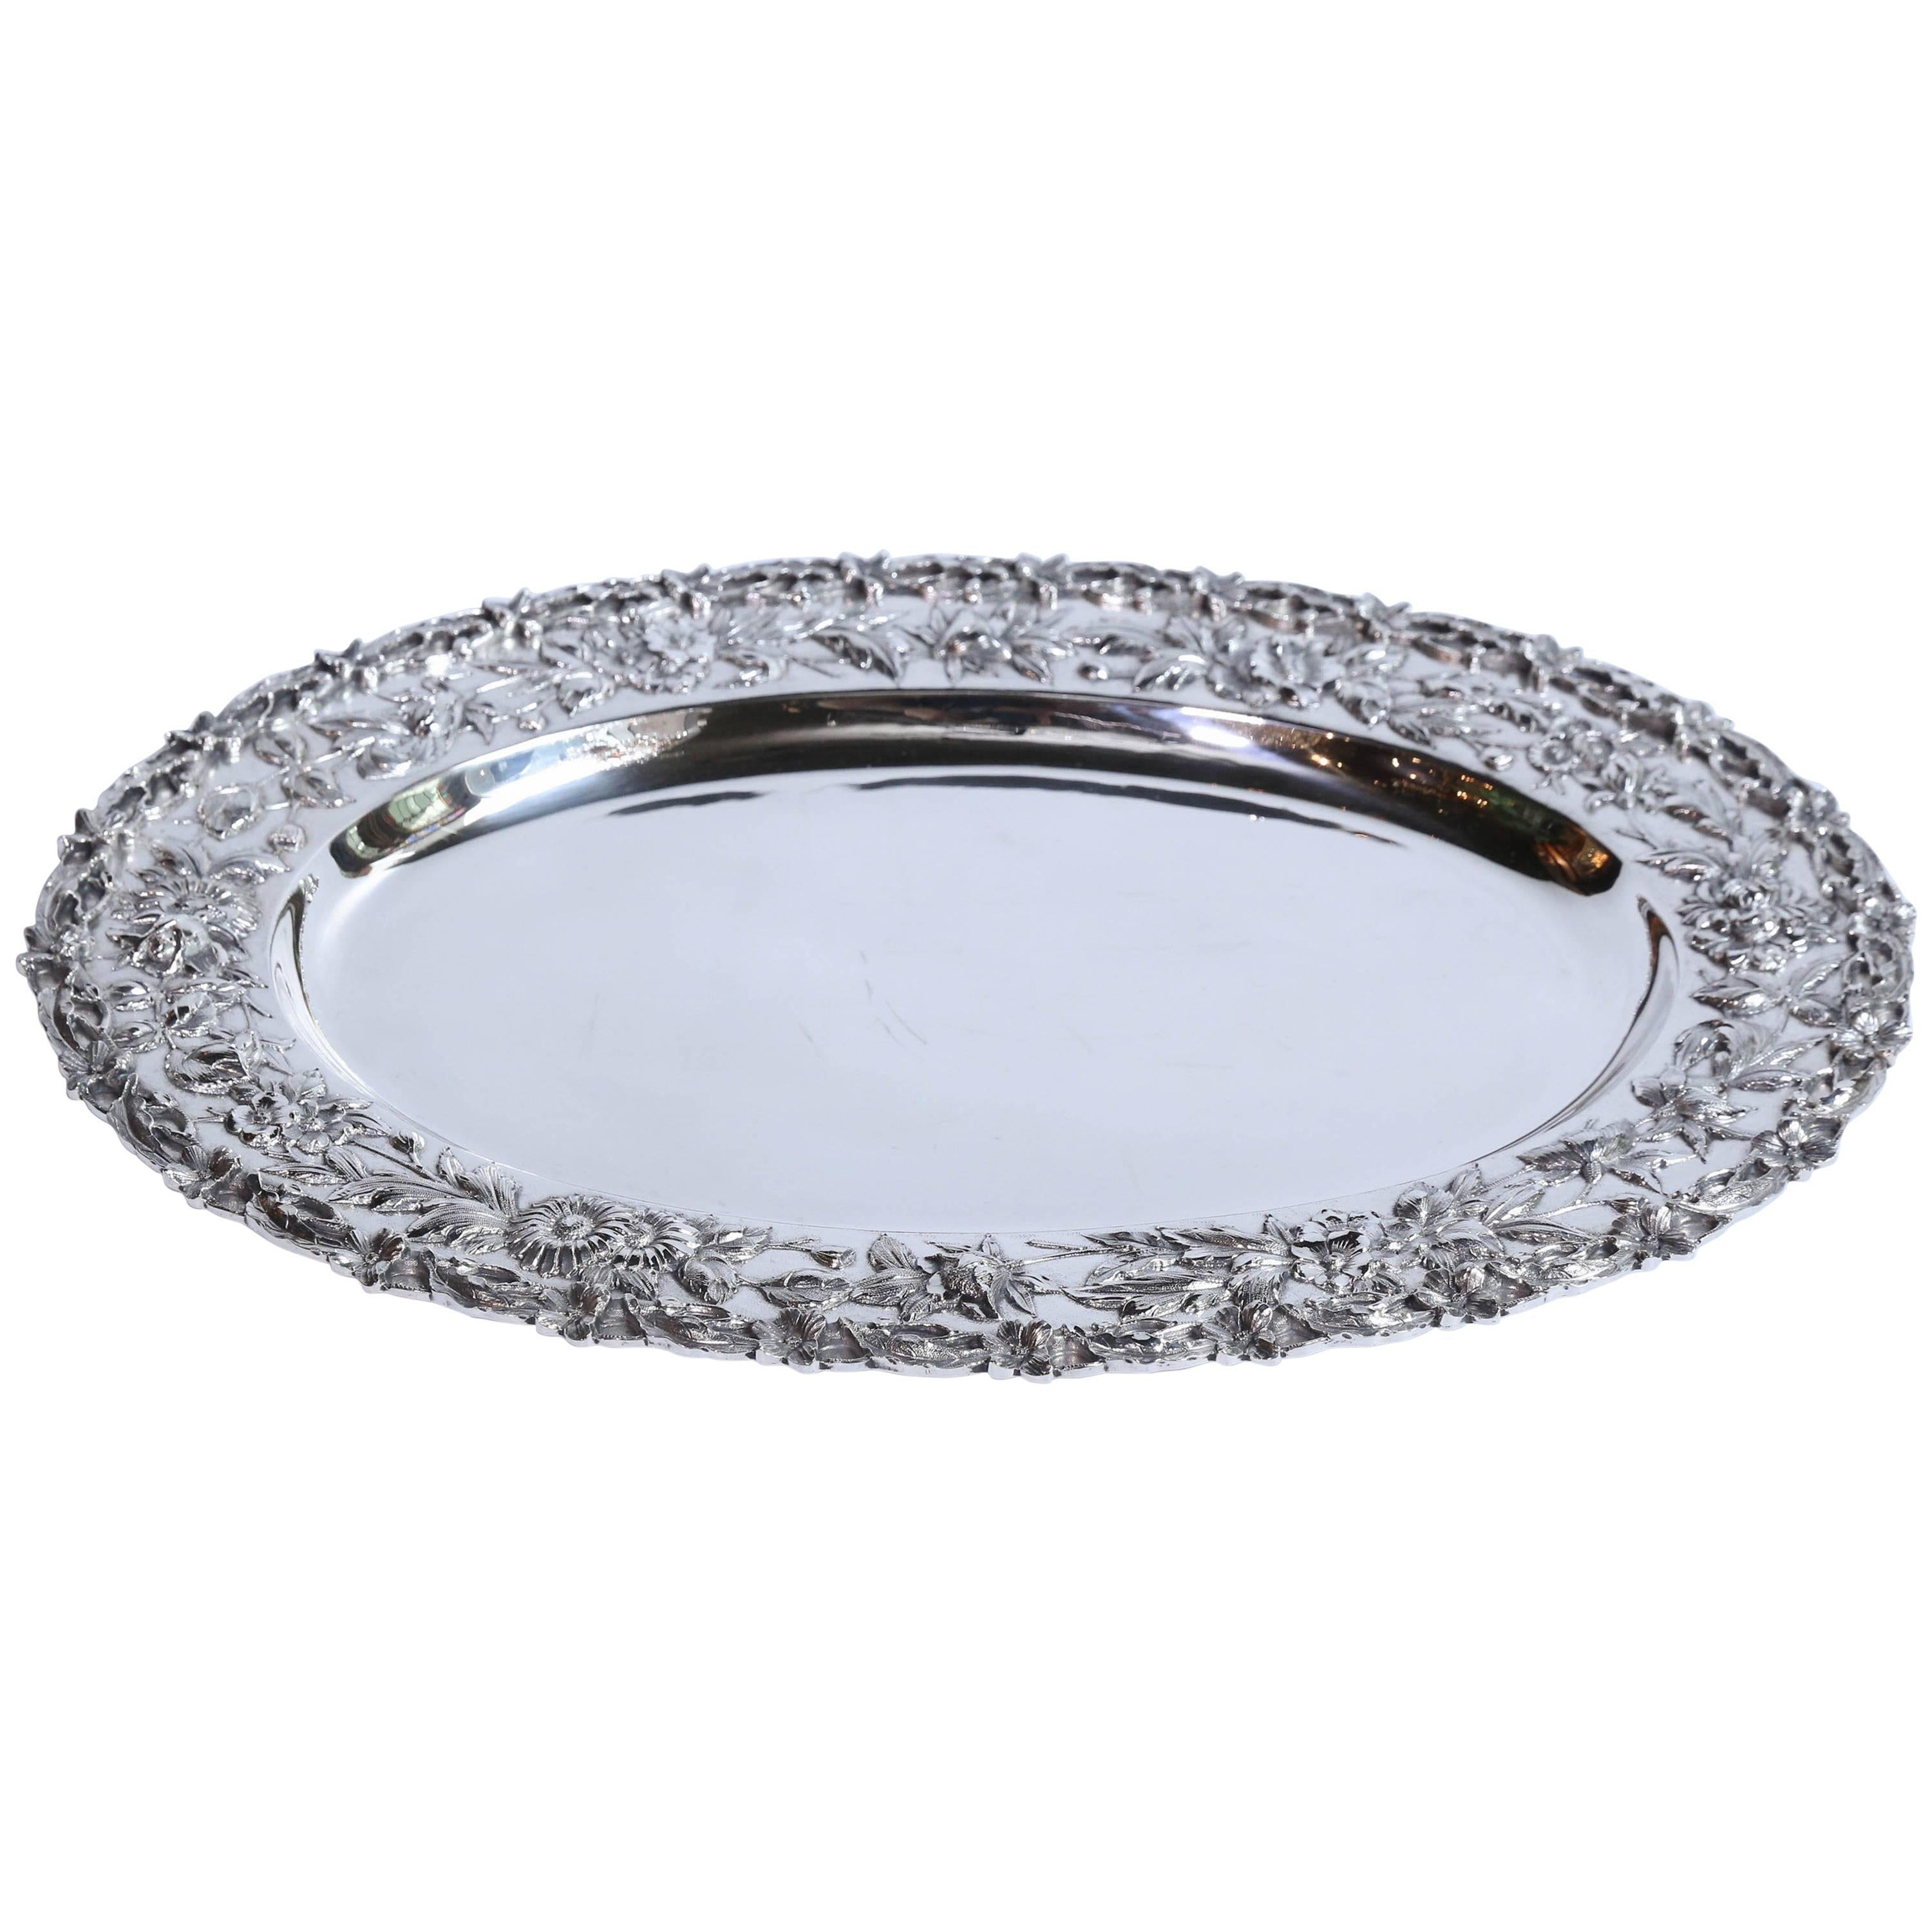 Oval Sterling Serving Tray by Kirk Stieff with Repousse Border